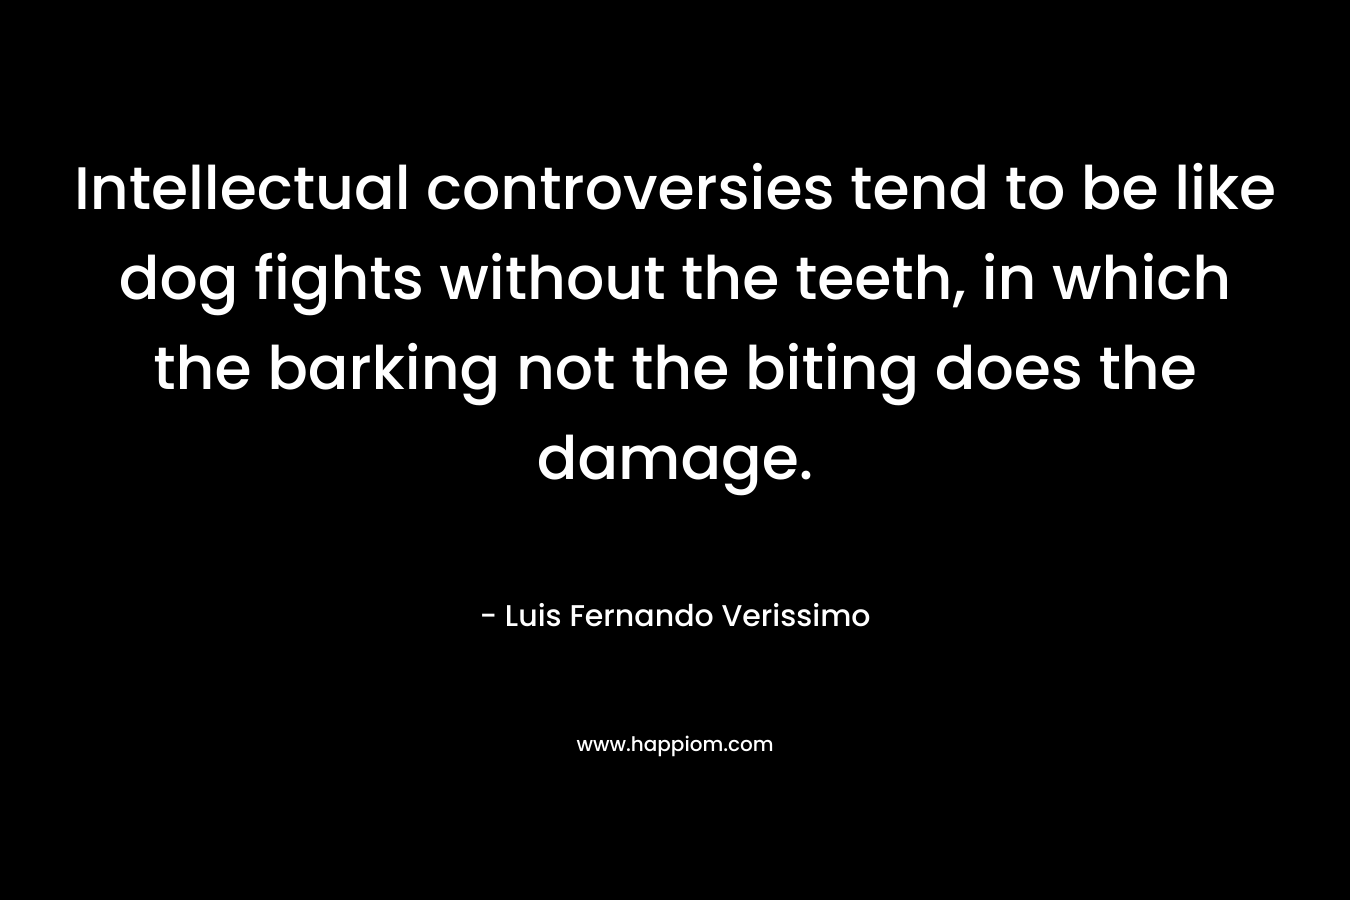 Intellectual controversies tend to be like dog fights without the teeth, in which the barking not the biting does the damage.